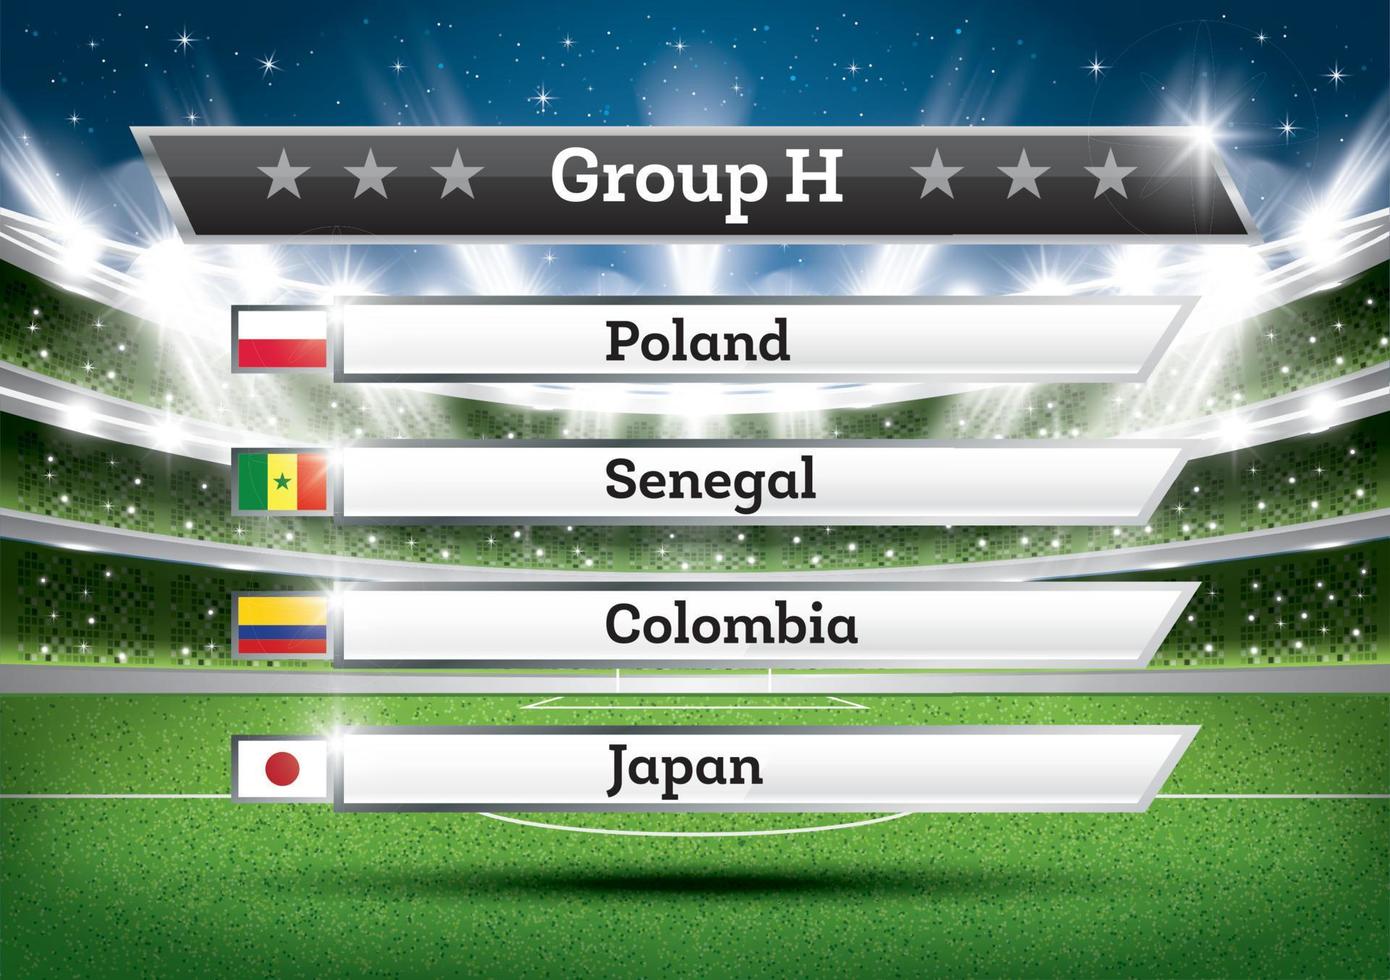 Football Championship Group H. Soccer World Tournament. Draw Result. vector